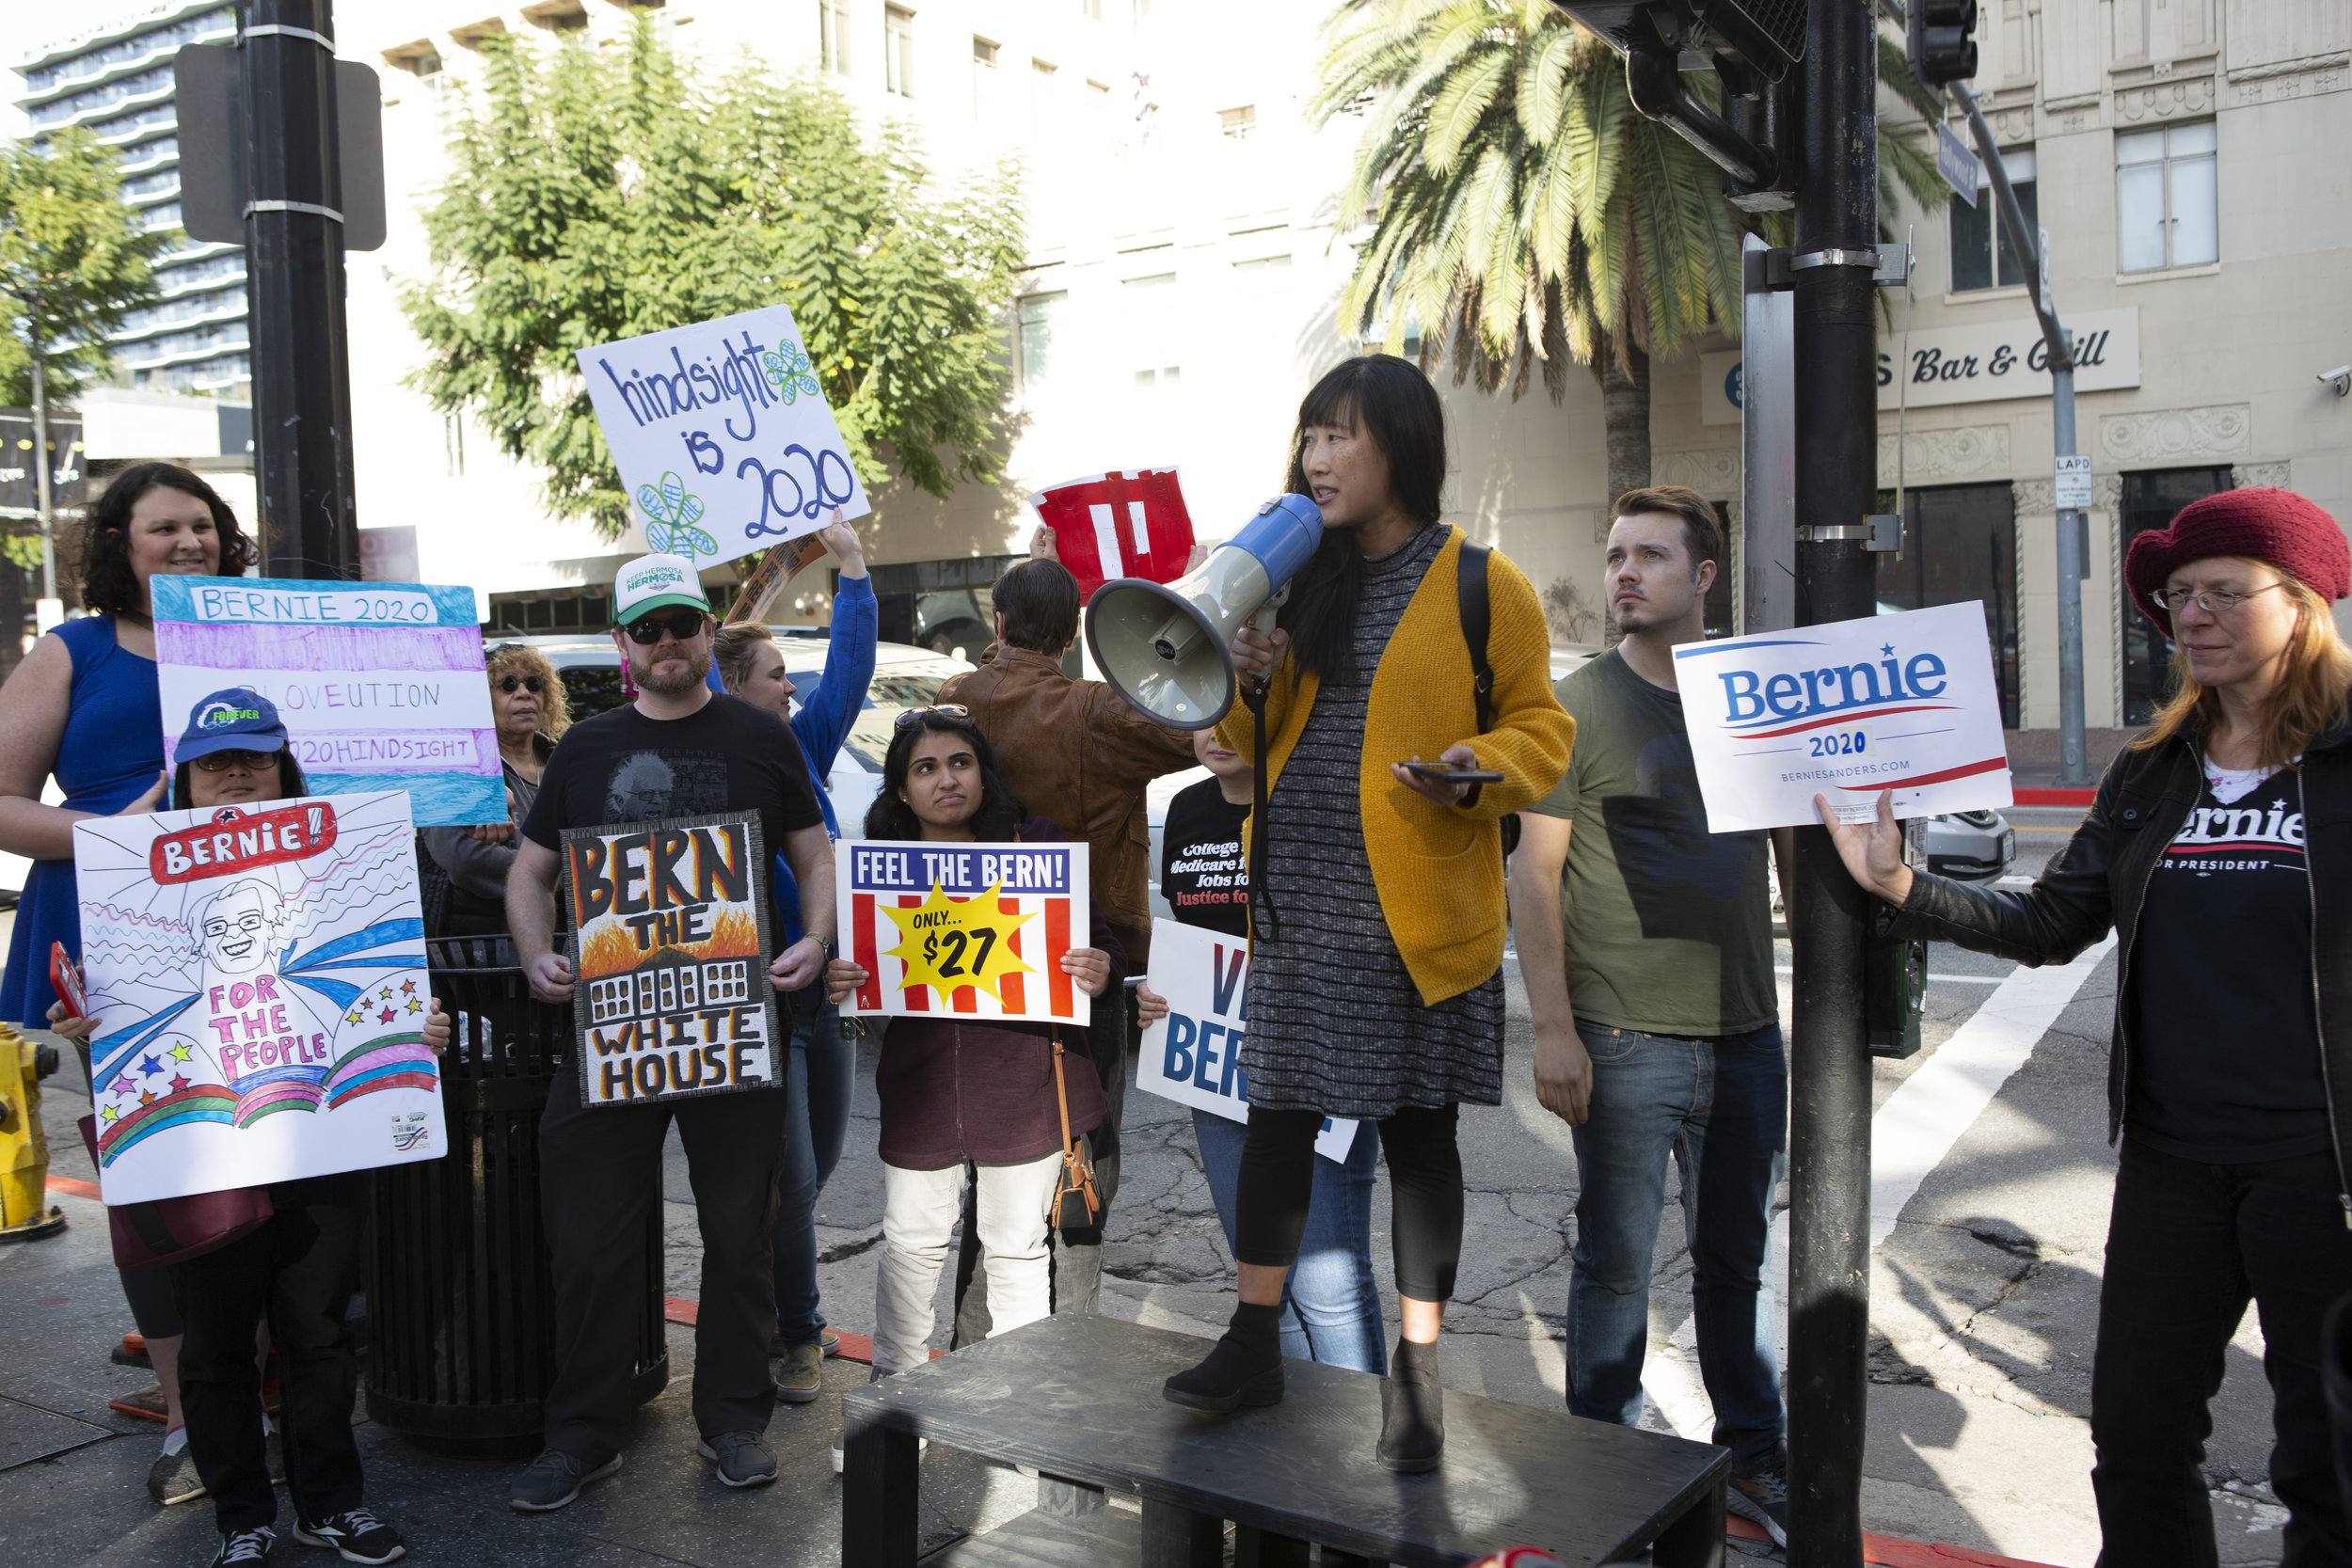  Bernie Sanders supporters gathered for the march and rally, Saturday, February 23, 2019 in Hollywood, Calif. Senator Bernie Sanders announced this past Tuesday that he will again seek the presidency and his supporters get together to support him wit